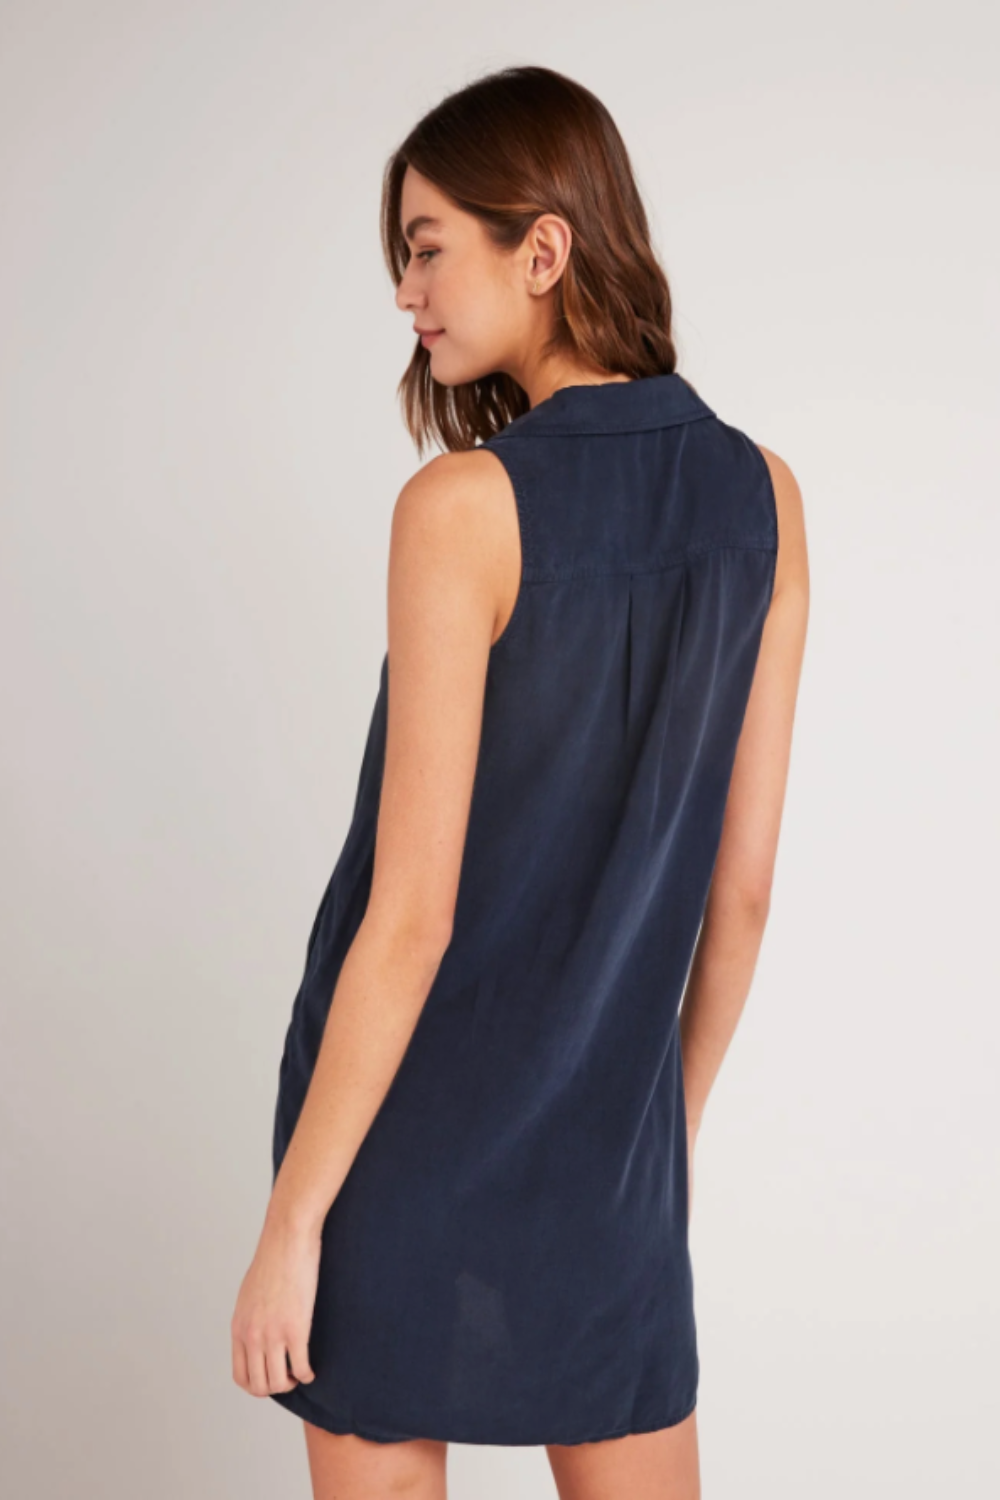 Sleeveless A-line Dress in Endless Sea